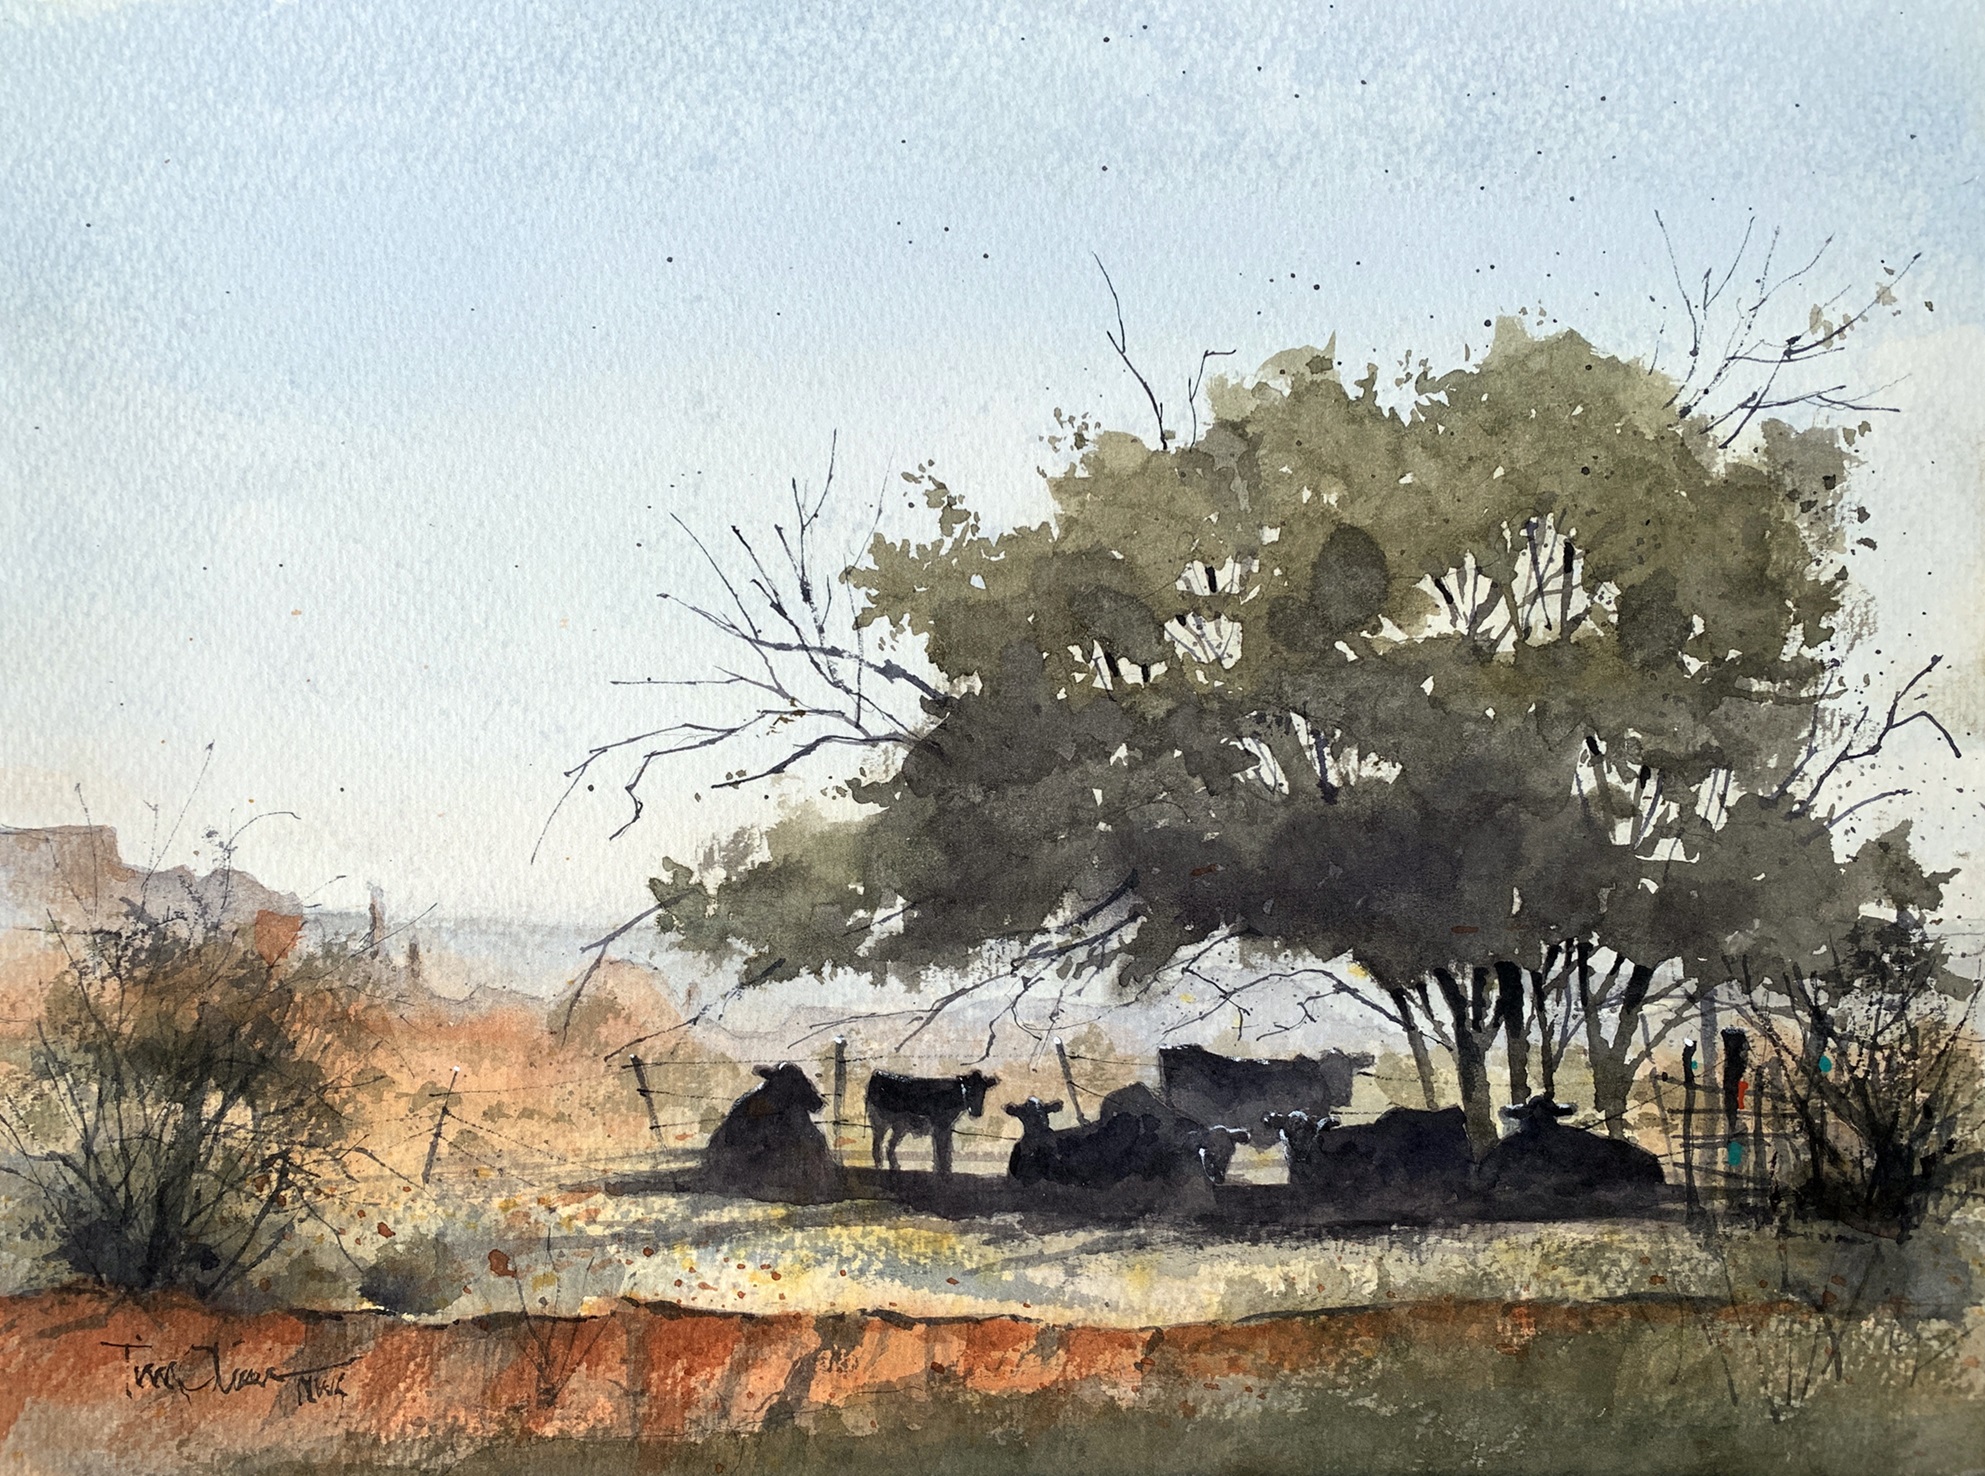 6. "Laid up in the shade" plein air painting watercolor